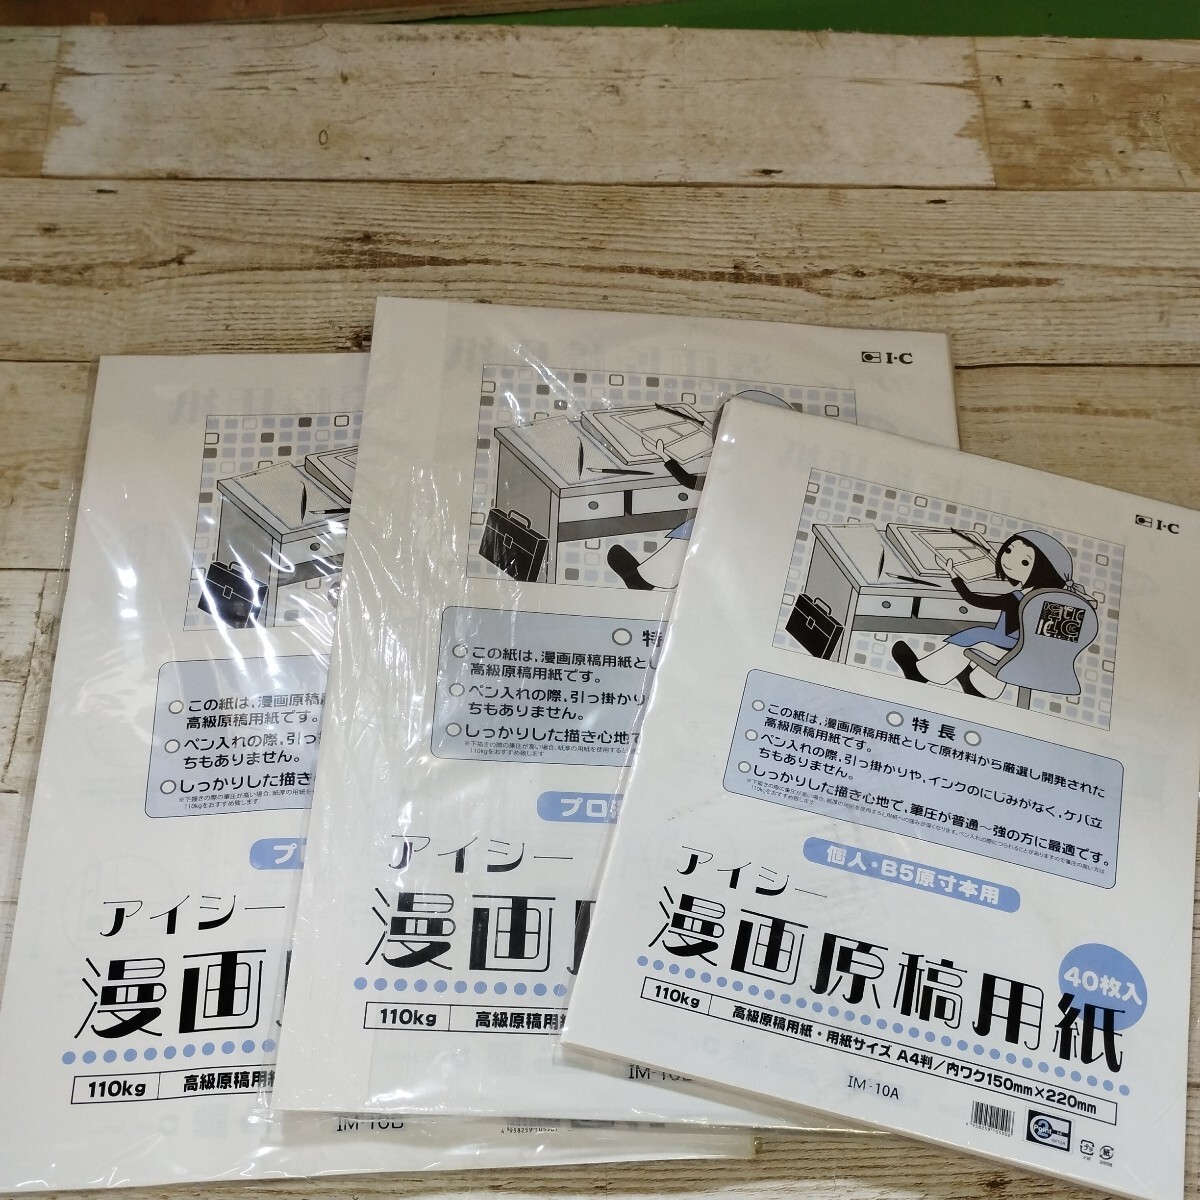 0604y3011*1 jpy start *[ set ]* I si-(IC) manga manuscript paper B4 light 110kg IM-10B* manga manuscript paper *A4 stamp ** including in a package un- possible *